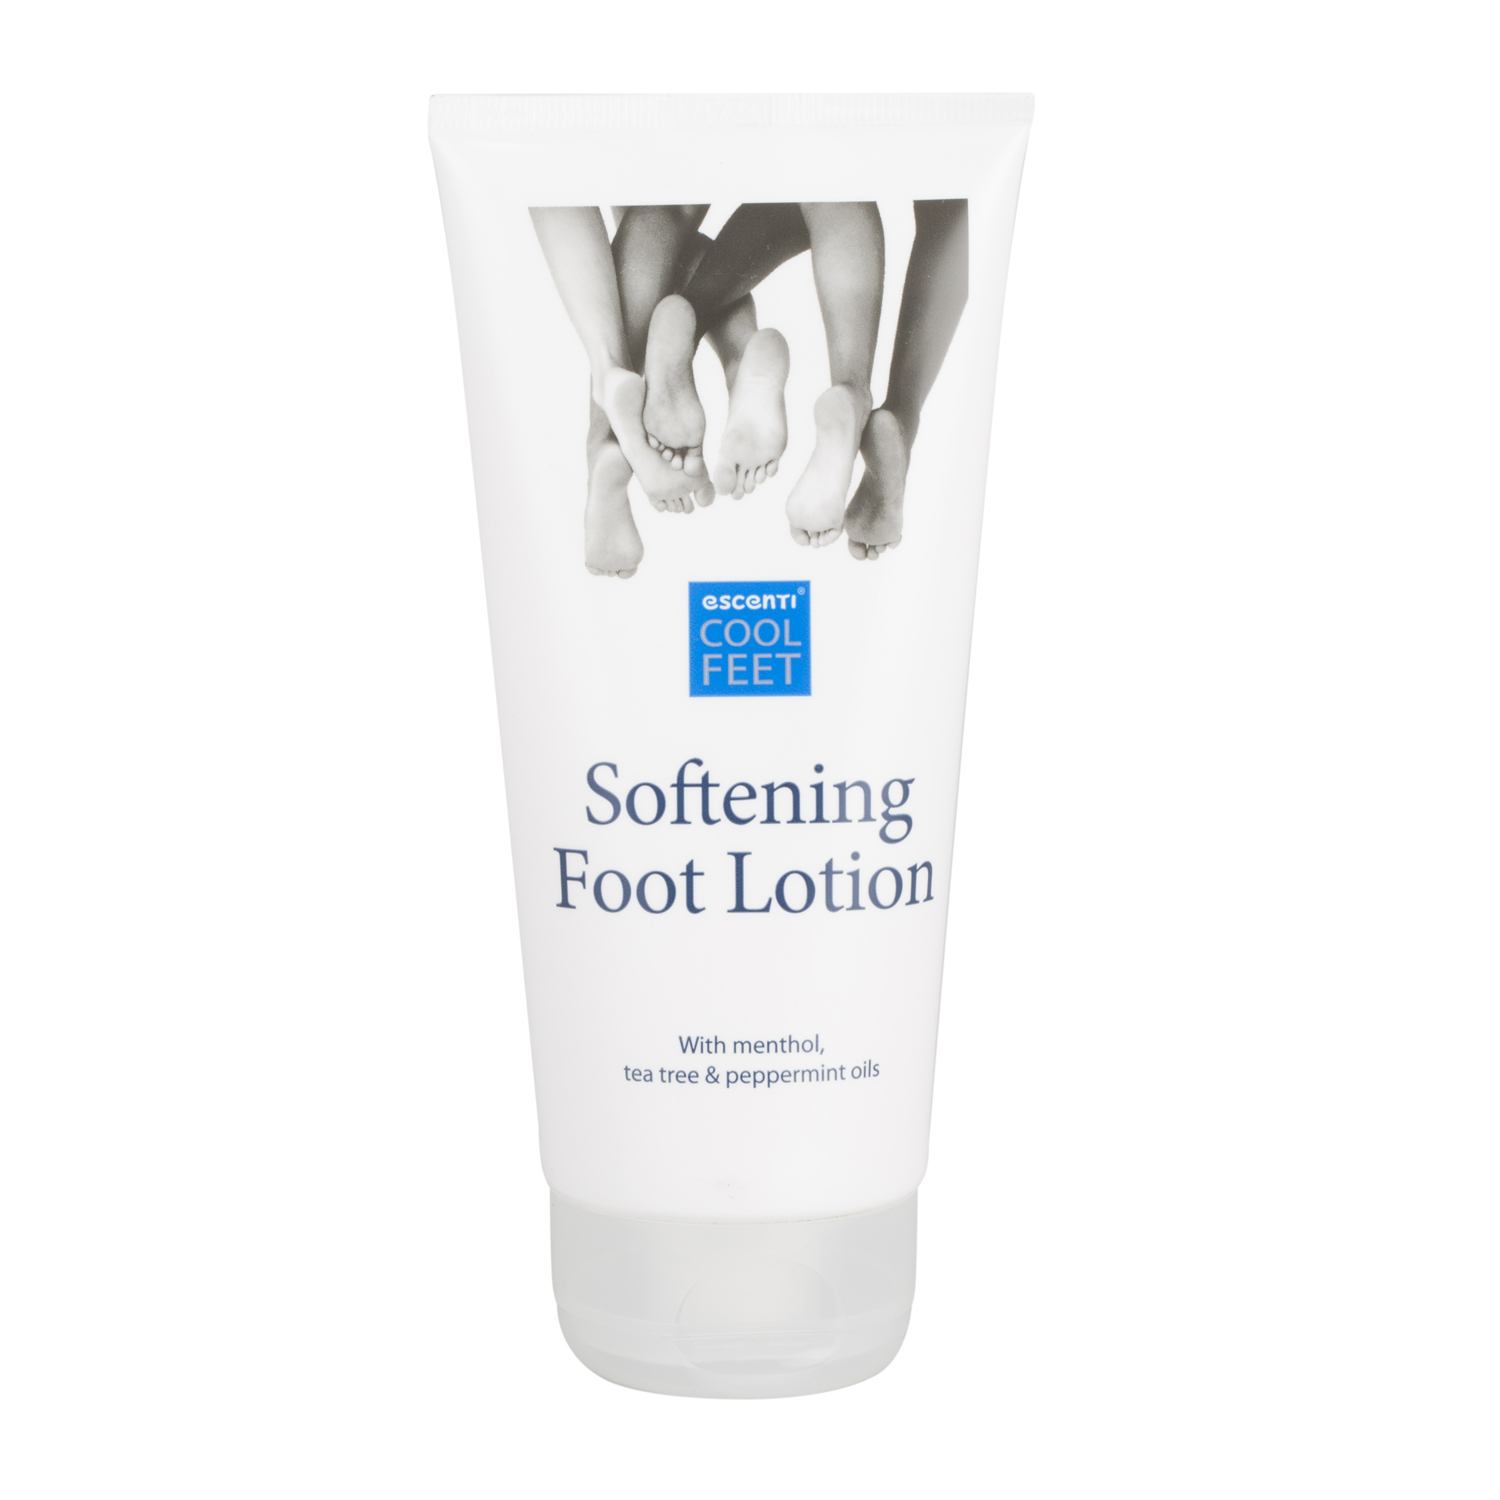 Escenti Cool Feet Softening Foot Lotion Image